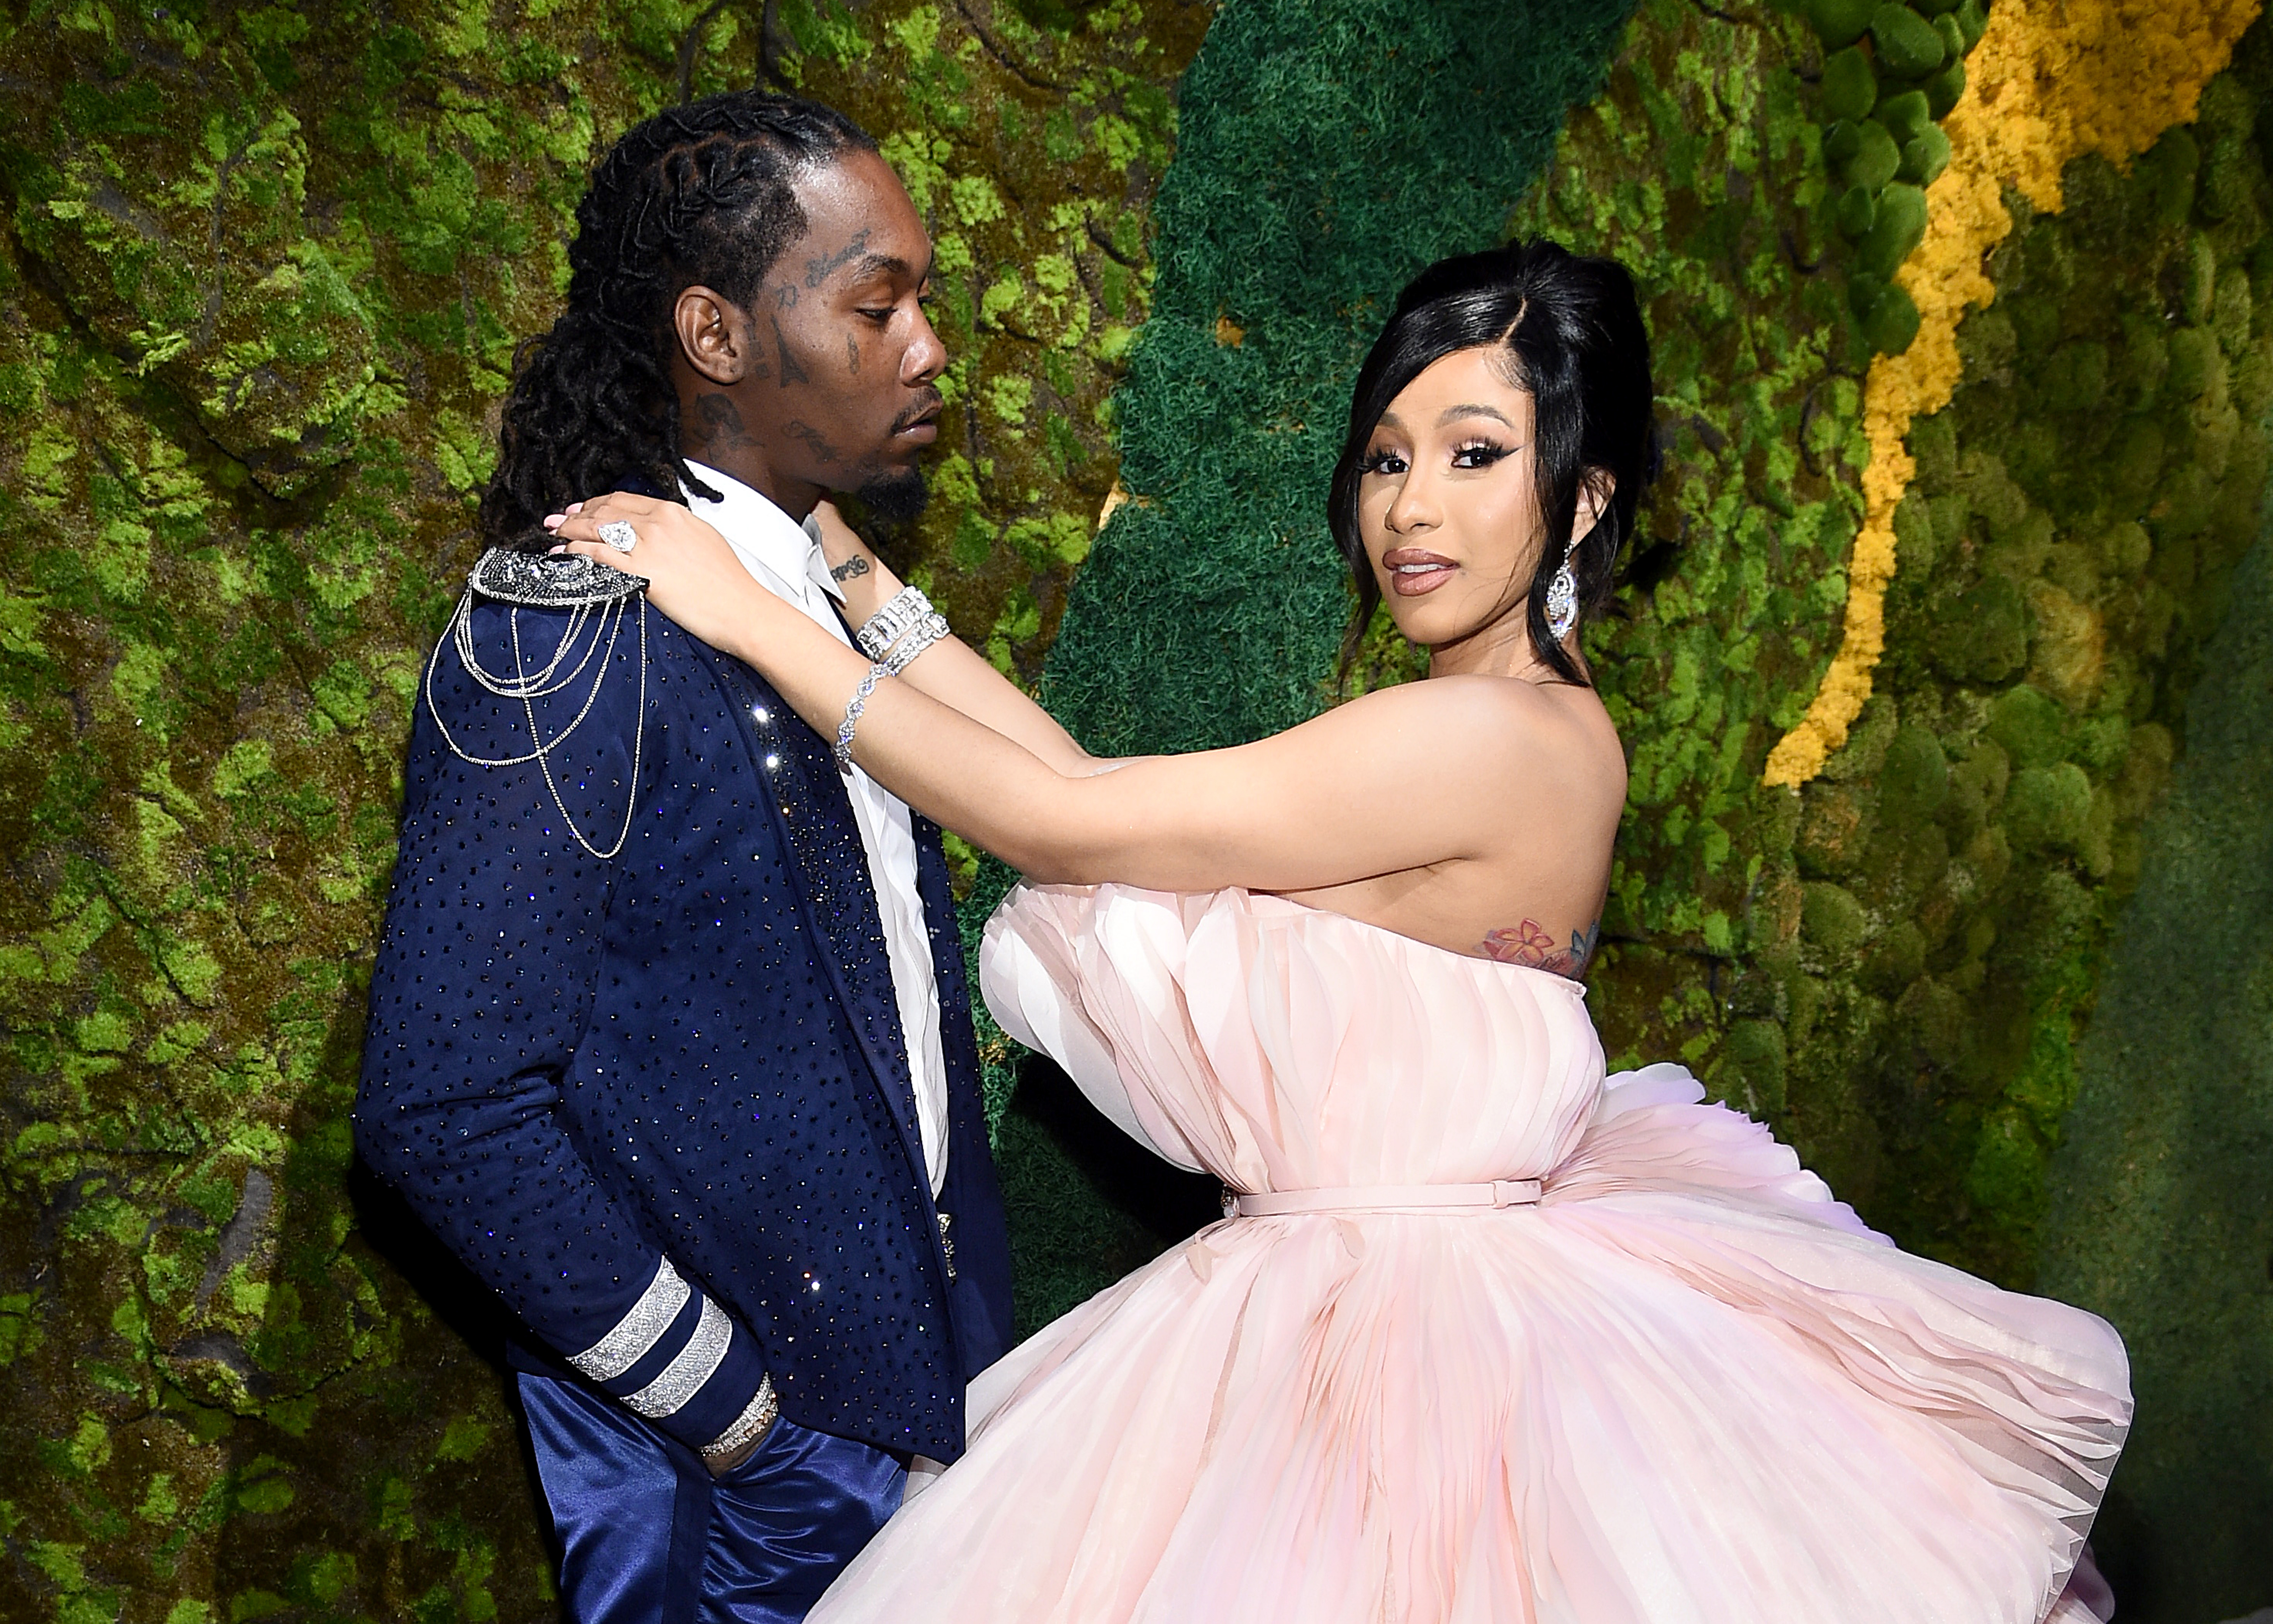 Cardi B Skipped Her Period So She Could Have Sex With Offset For The First Time